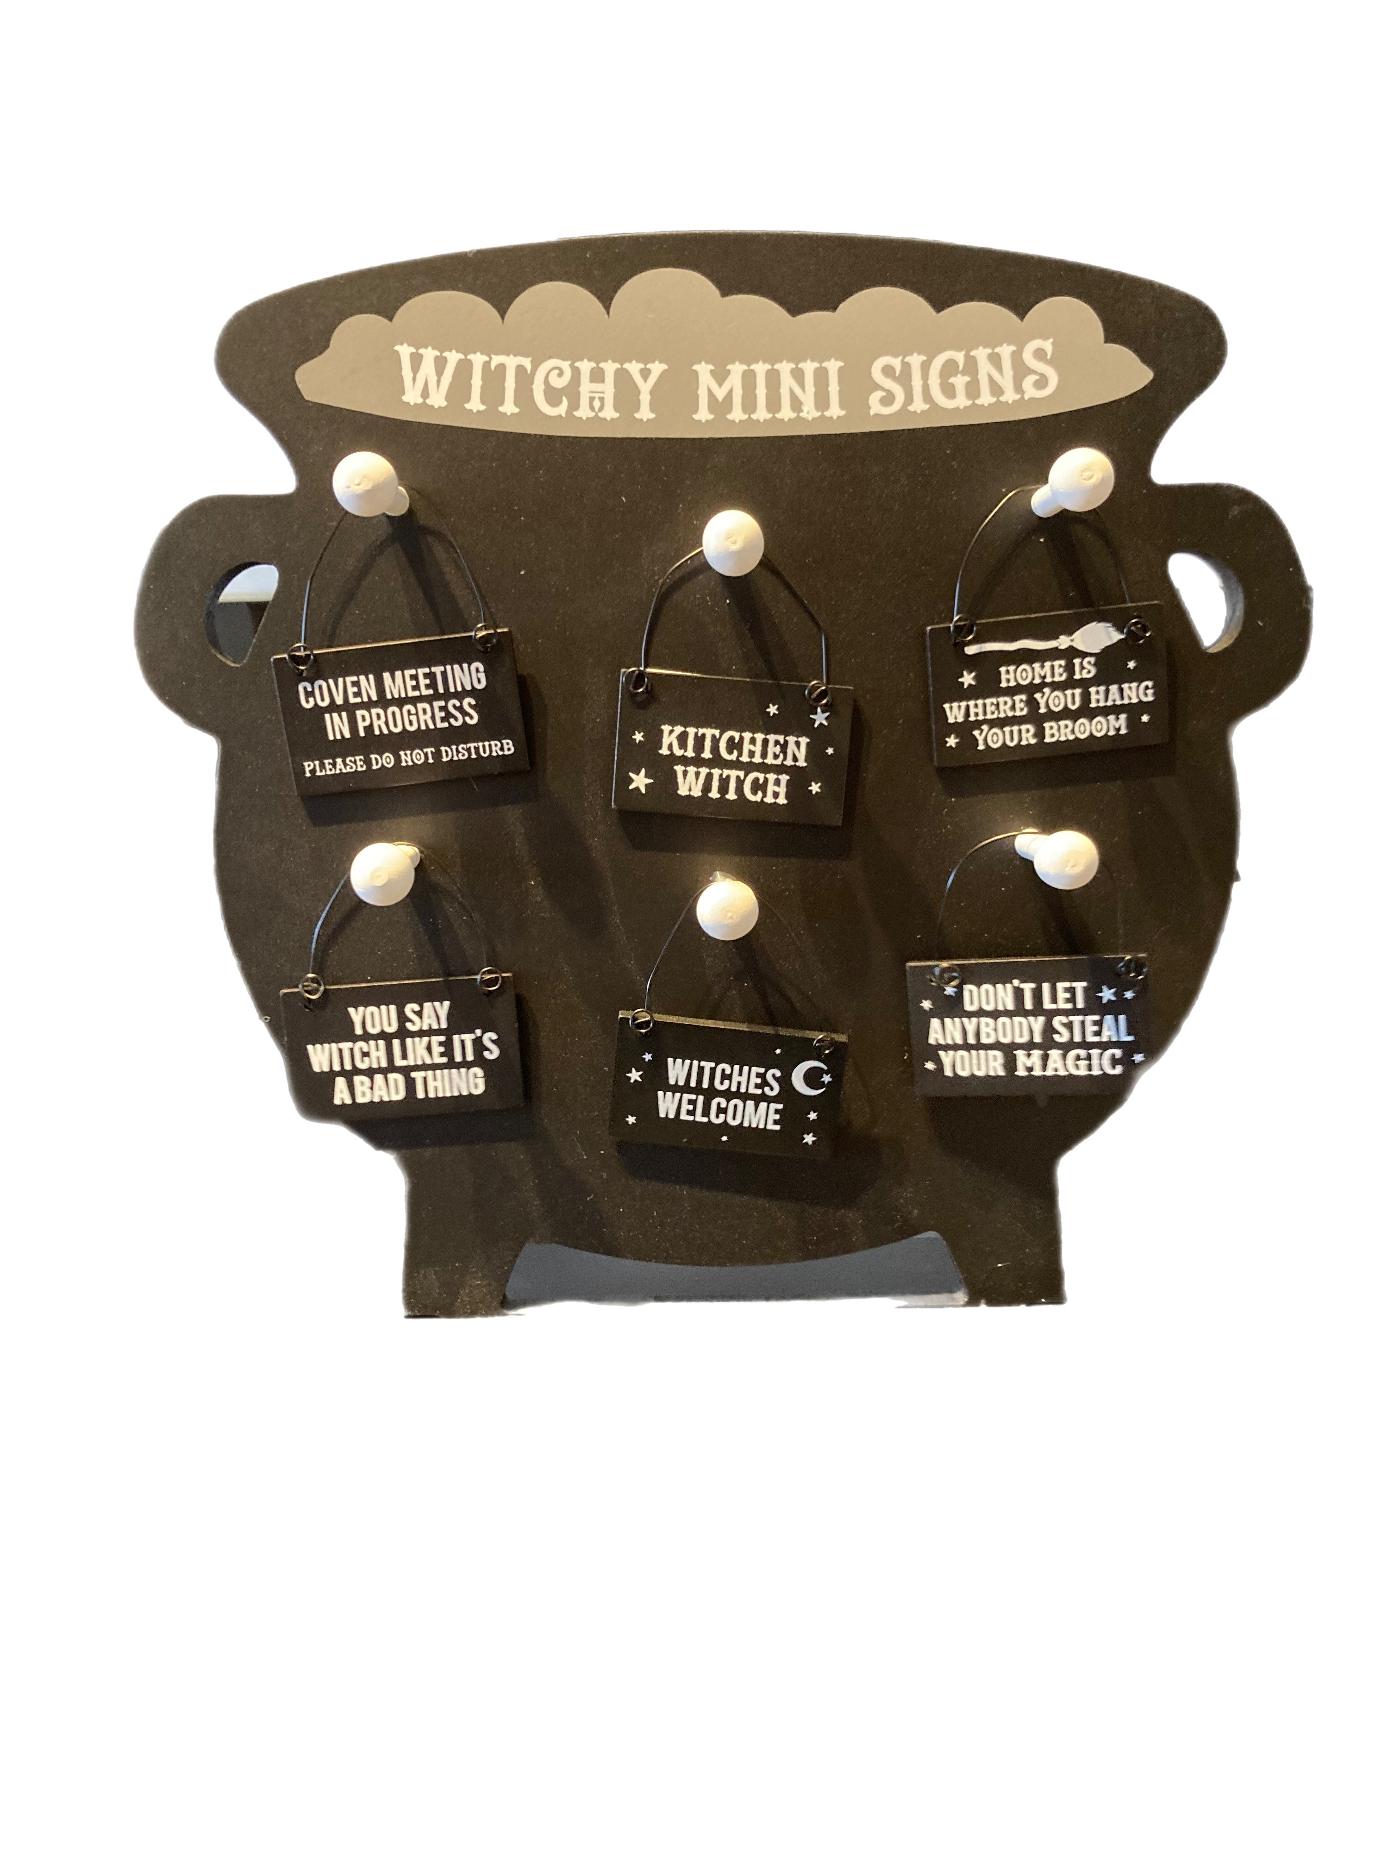 Mini Witchy signs